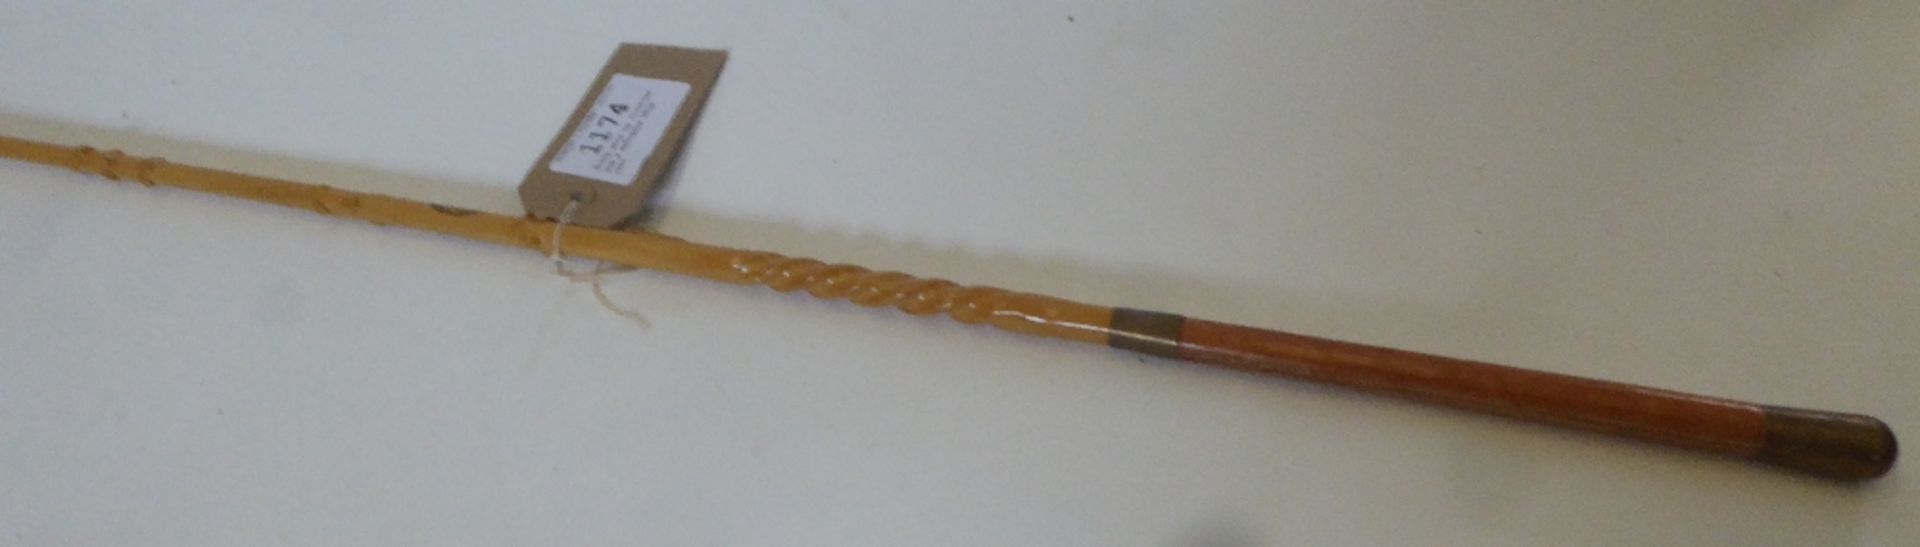 Holly whip by Clothier and a mahogany whip reel